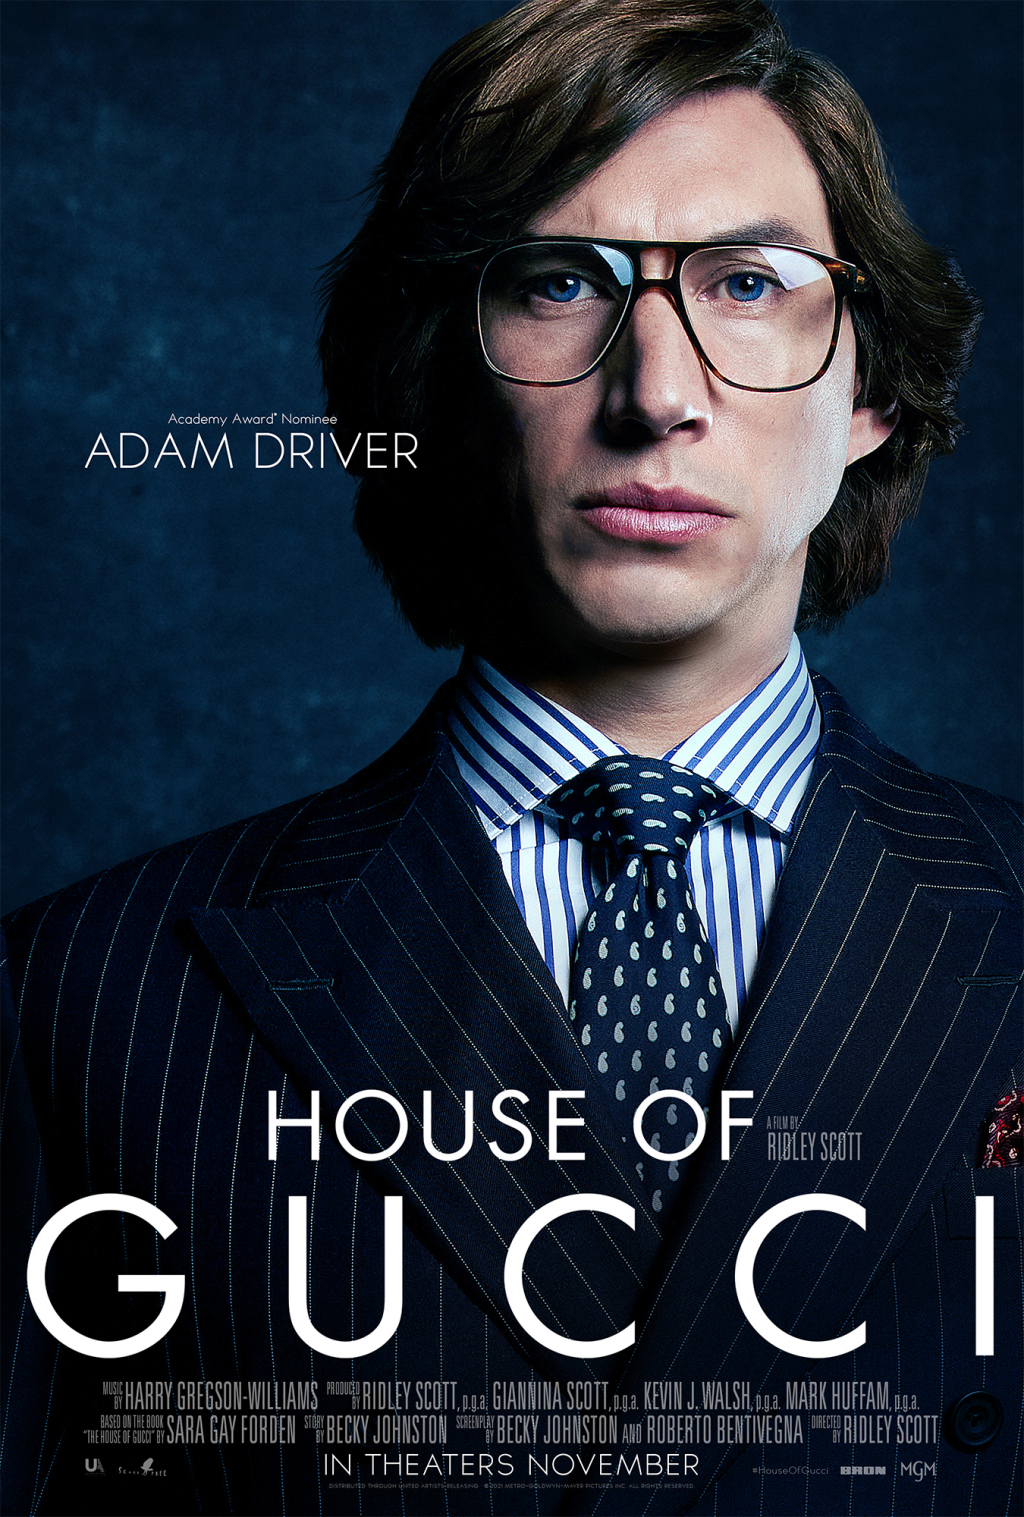 REVEALED: House of Gucci releases character posters of Lady Gaga, Adam Driver, Jared Leto and others